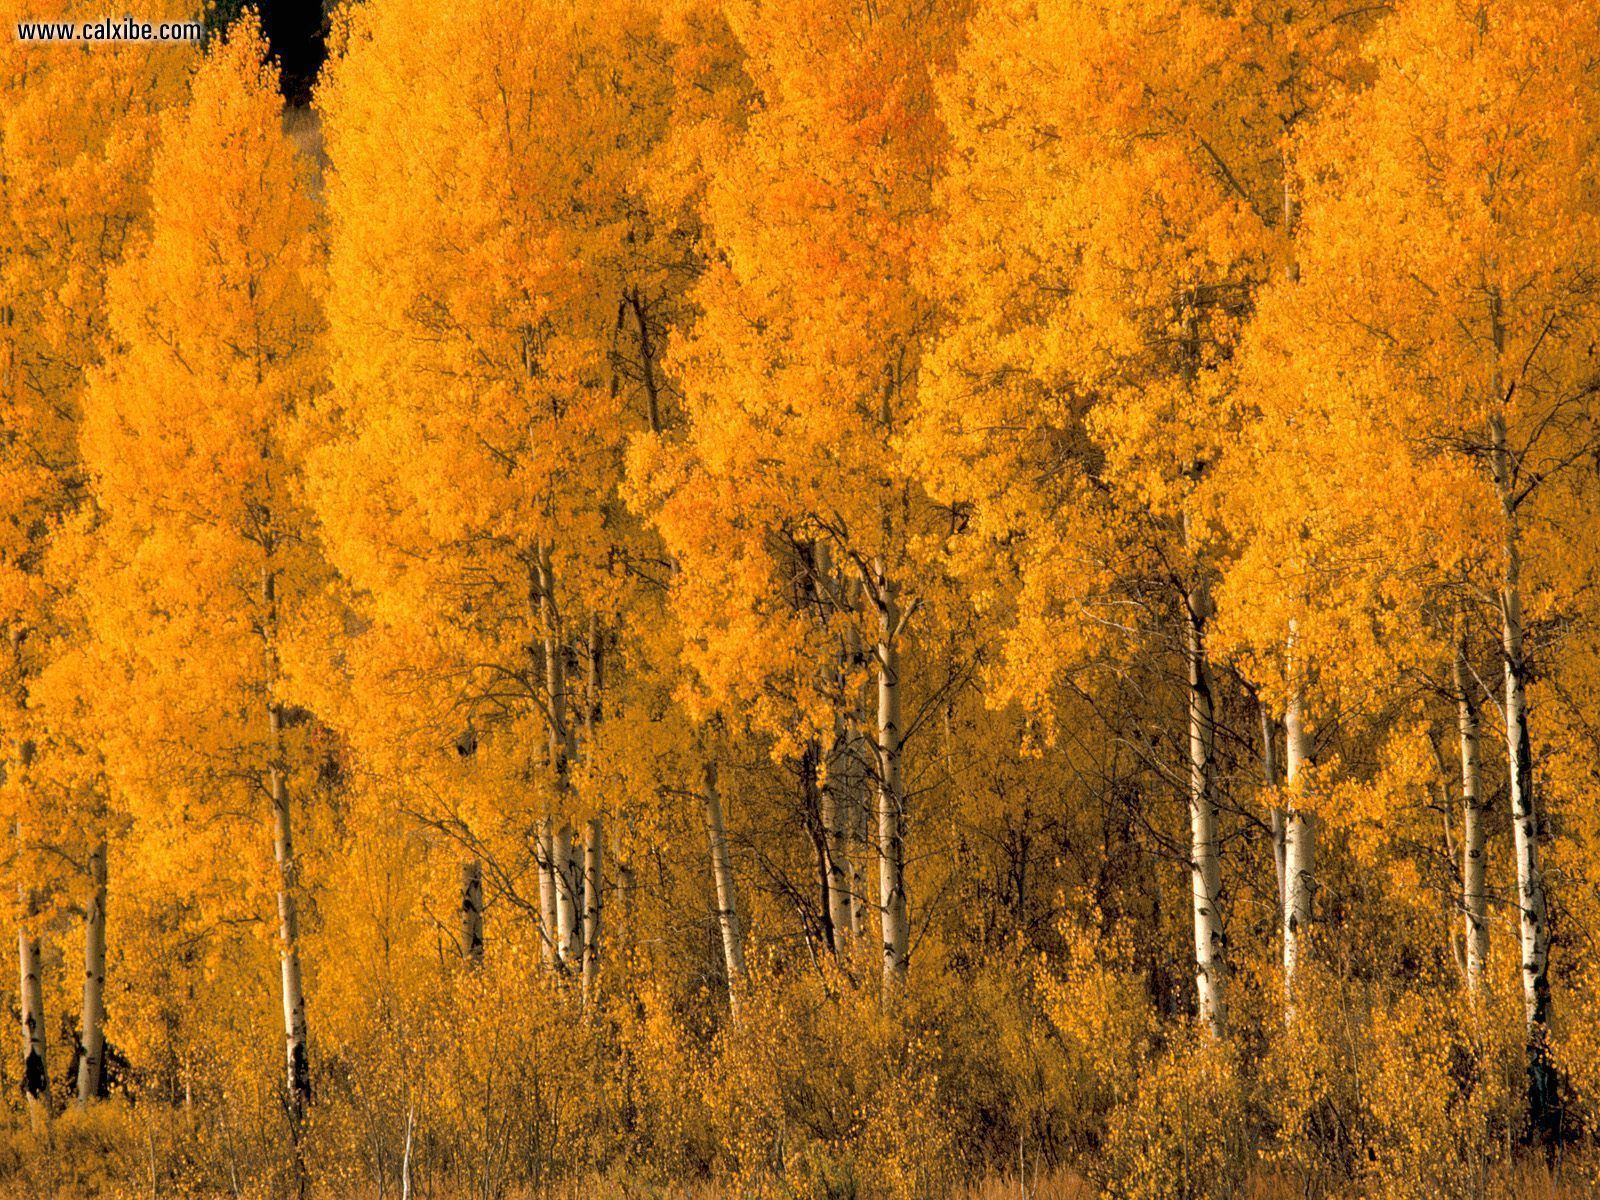 Aspen Trees, Montana in Nature, 1600x picture nr. 18967. Landscape picture, Aspen trees, Yellow tree wallpaper